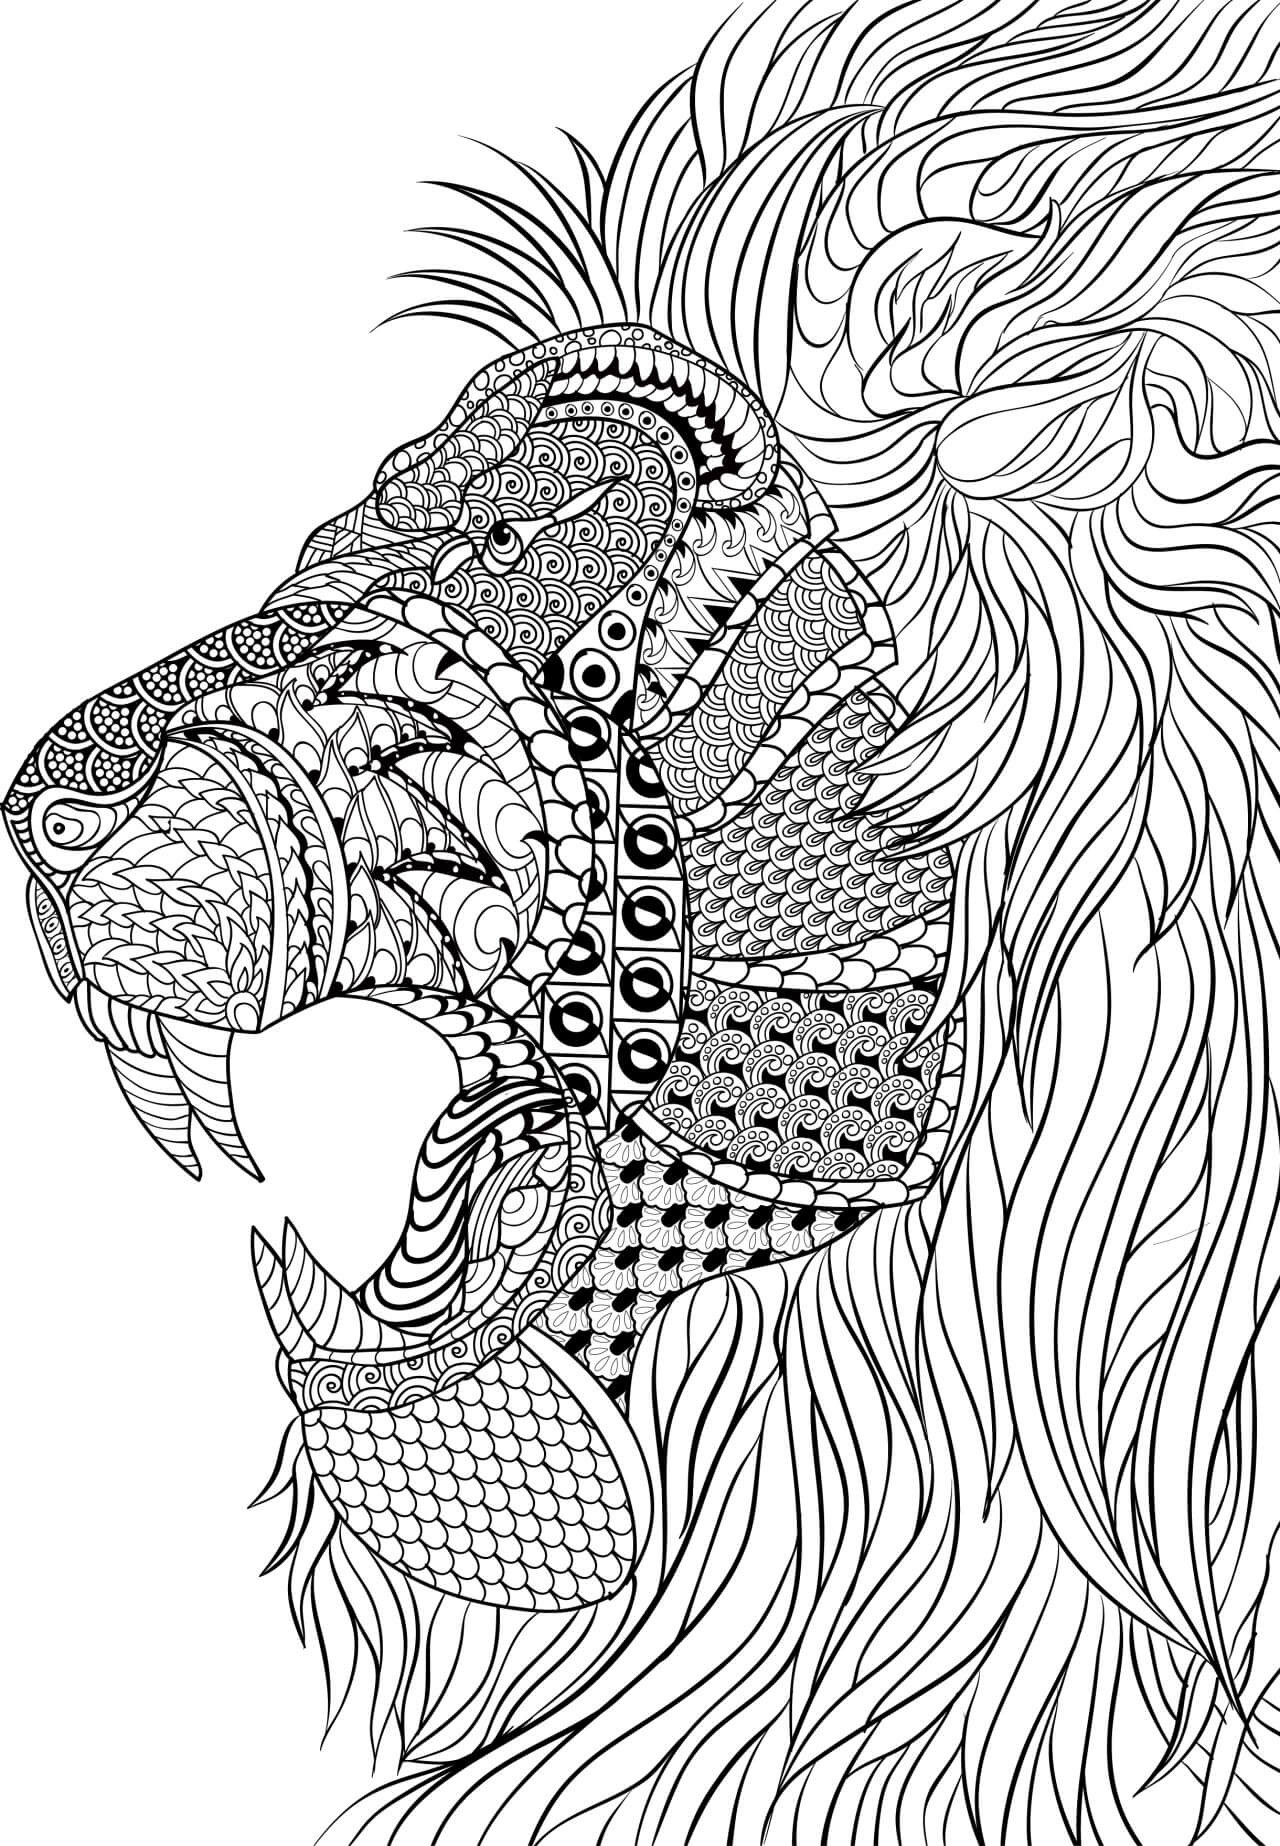 Challenging Coloring Pages For Adults
 Coloring Pages For Adults Difficult Animals 4